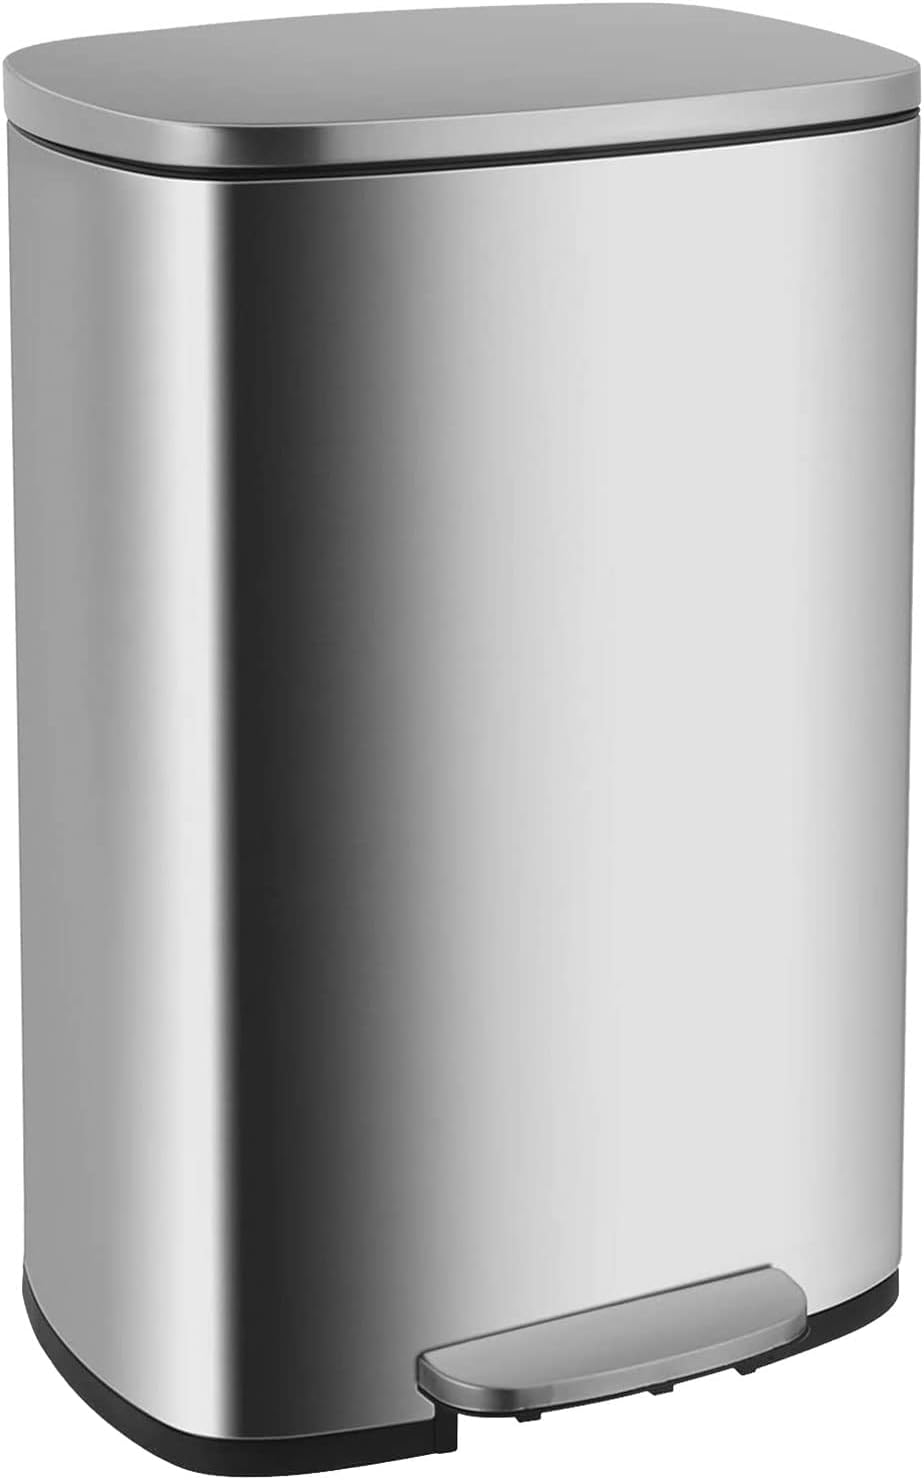 Goplus Automatic Motion Sensor Trash Can, 8 Gallon /30 L Touchless Trash  Bin with Soft Close Lid, Round Stainless Steel Waste Bin, Smart Electric